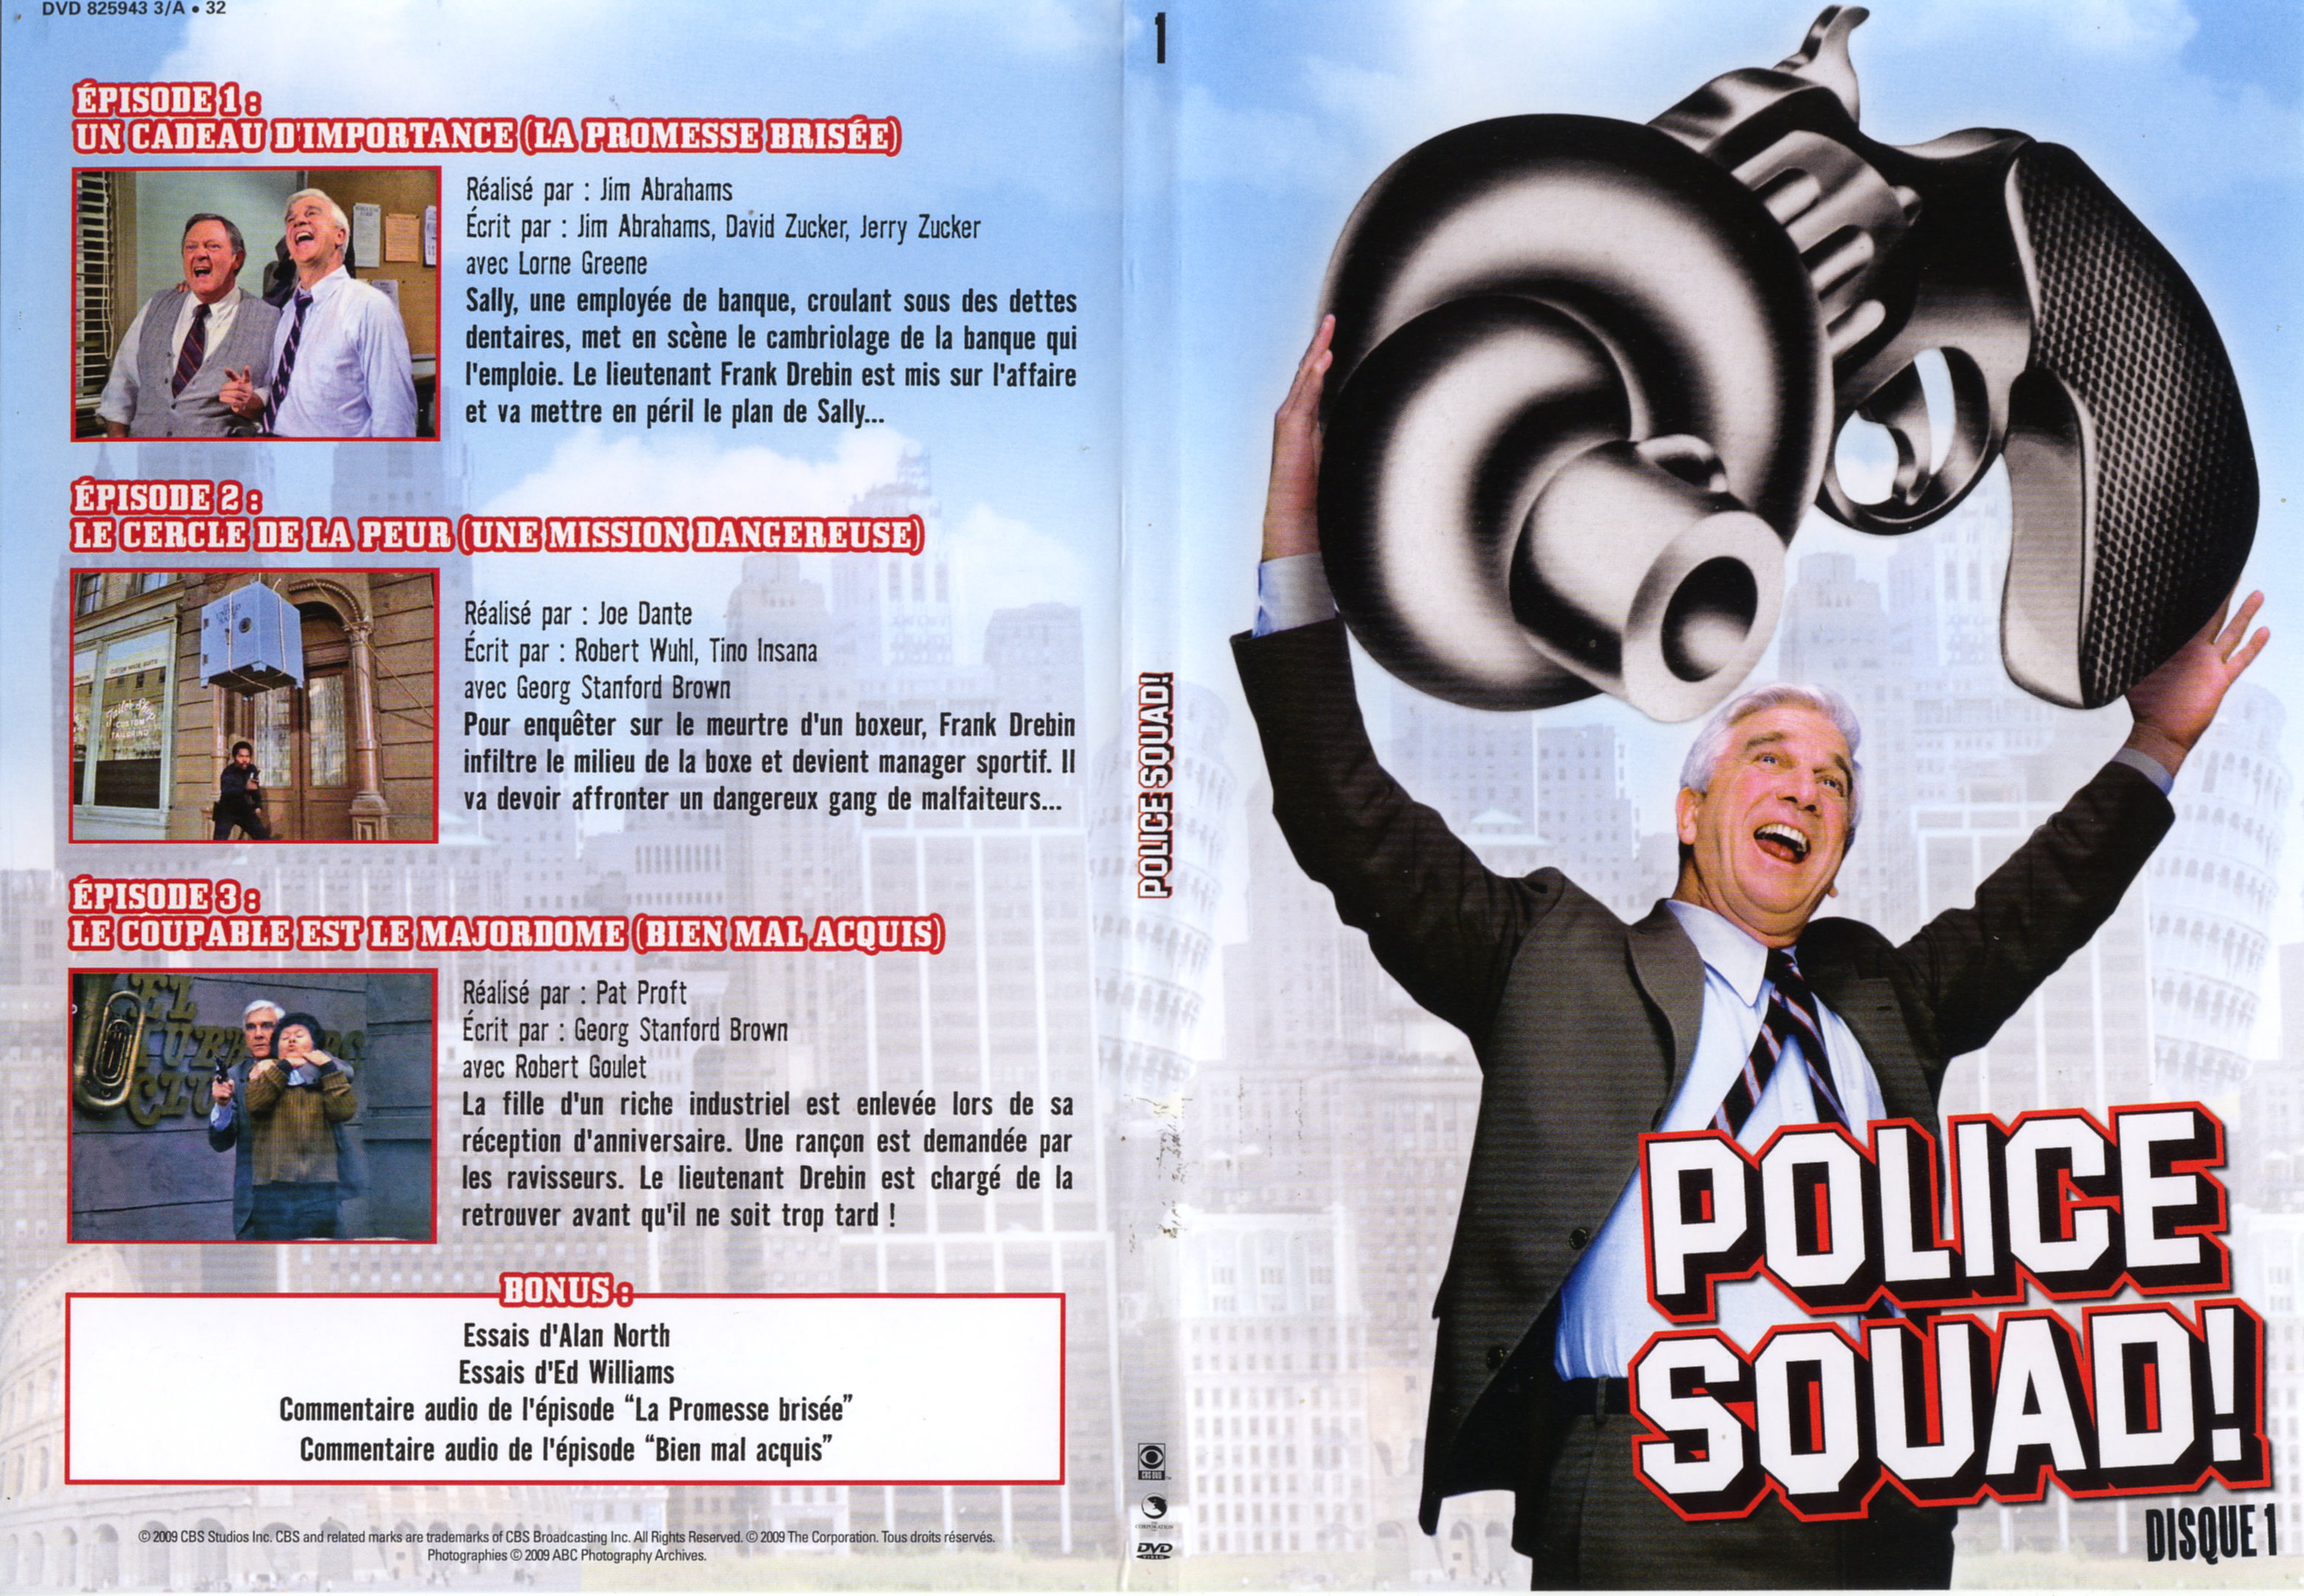 Jaquette DVD Police squad DVD 1